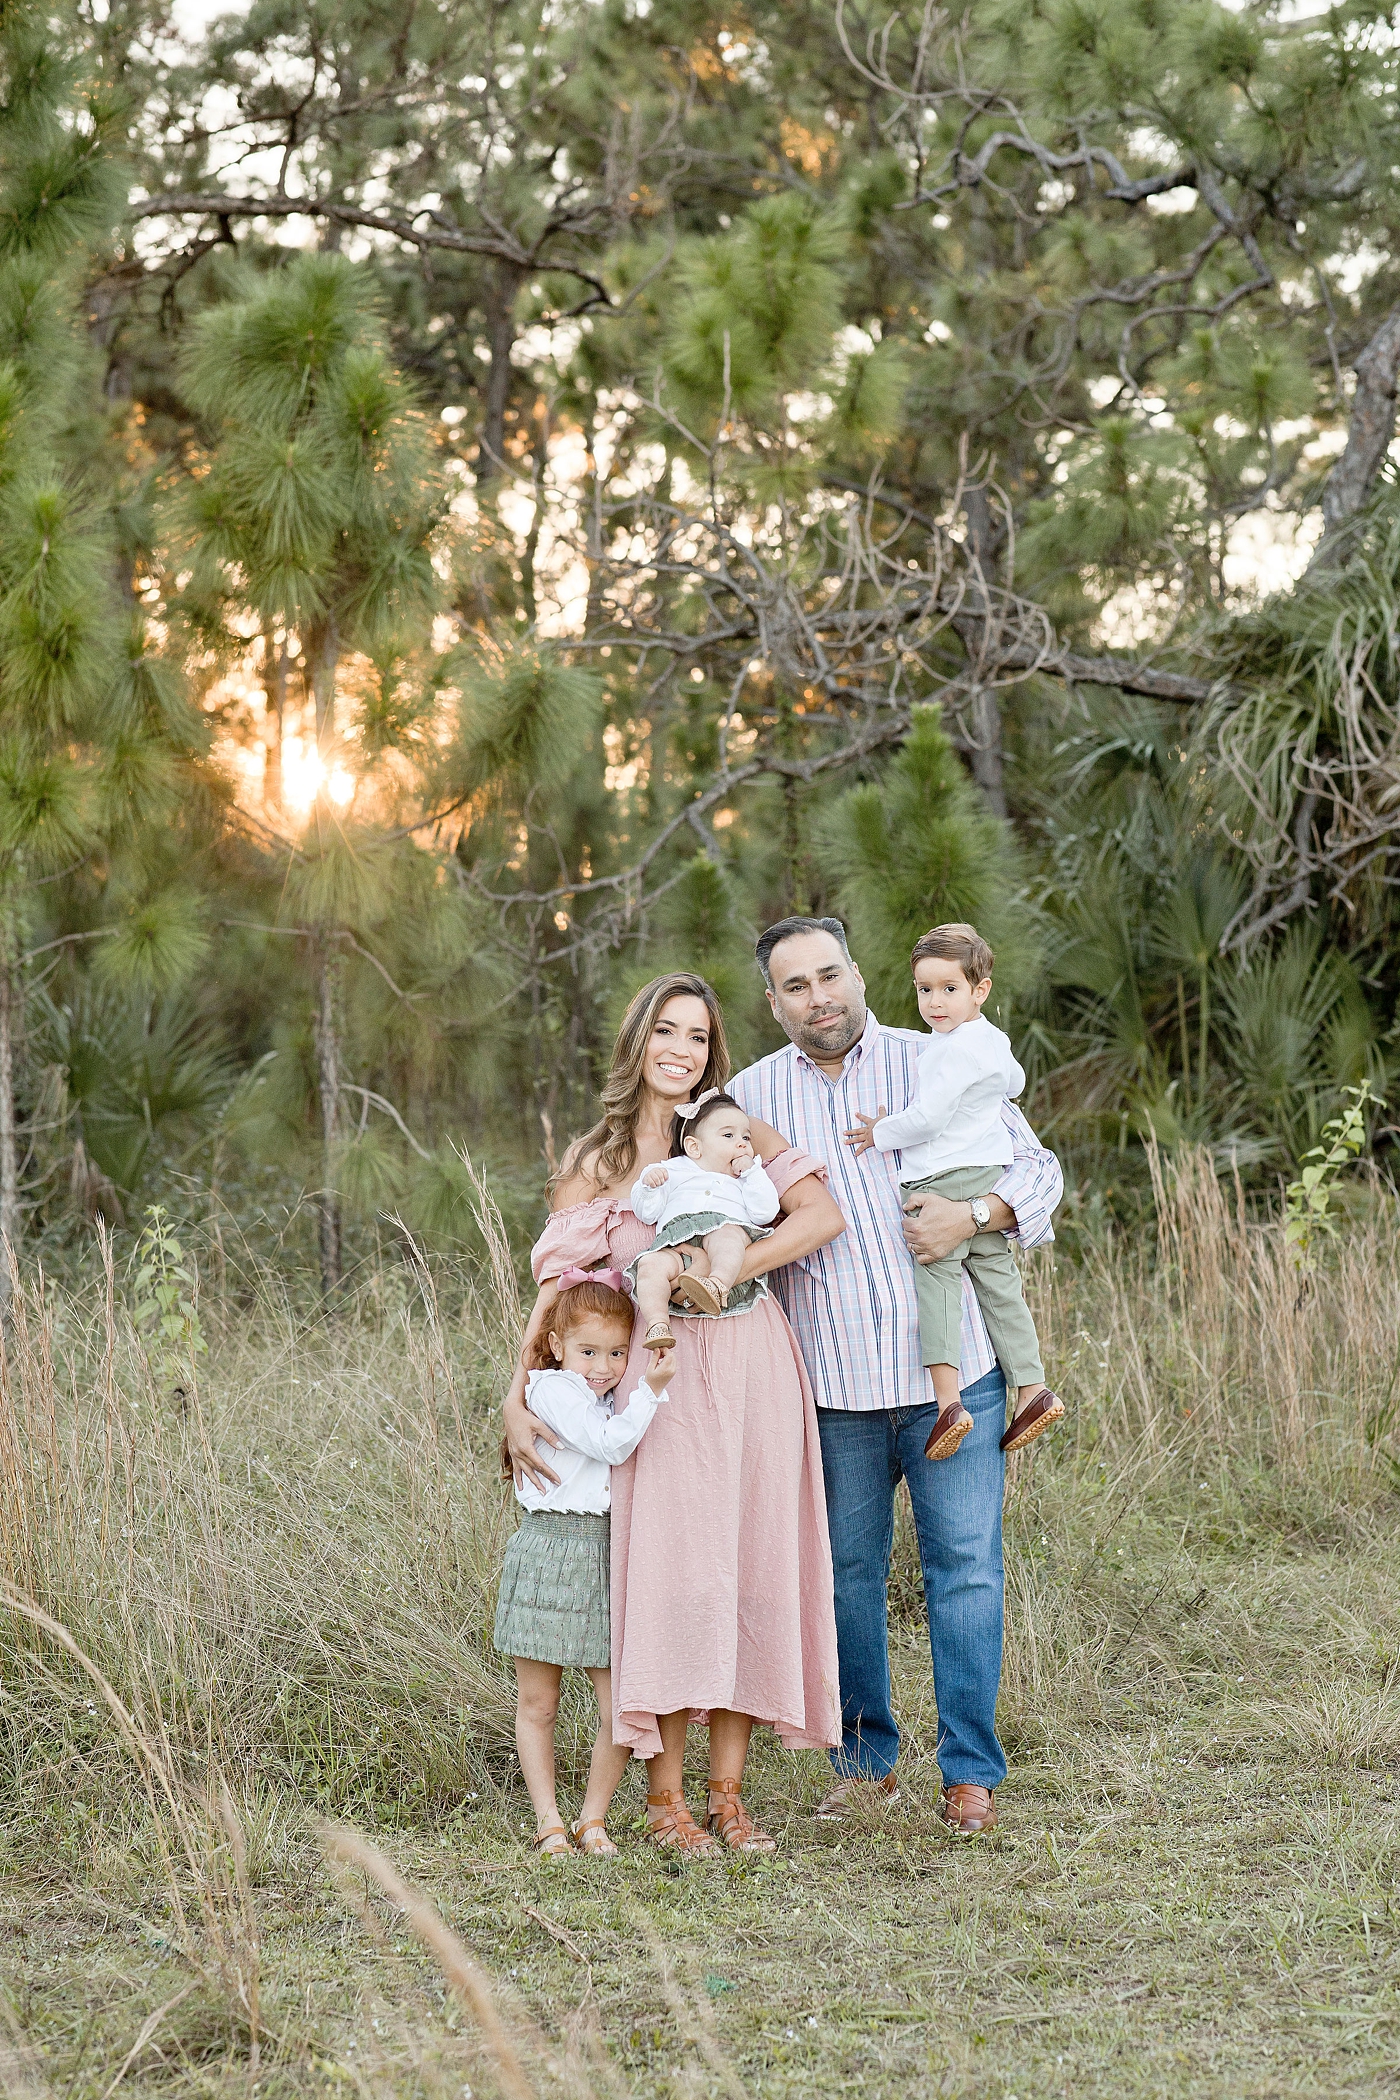 Family of five photographed in Miami field. Photo by Ivanna Vidal Photography.